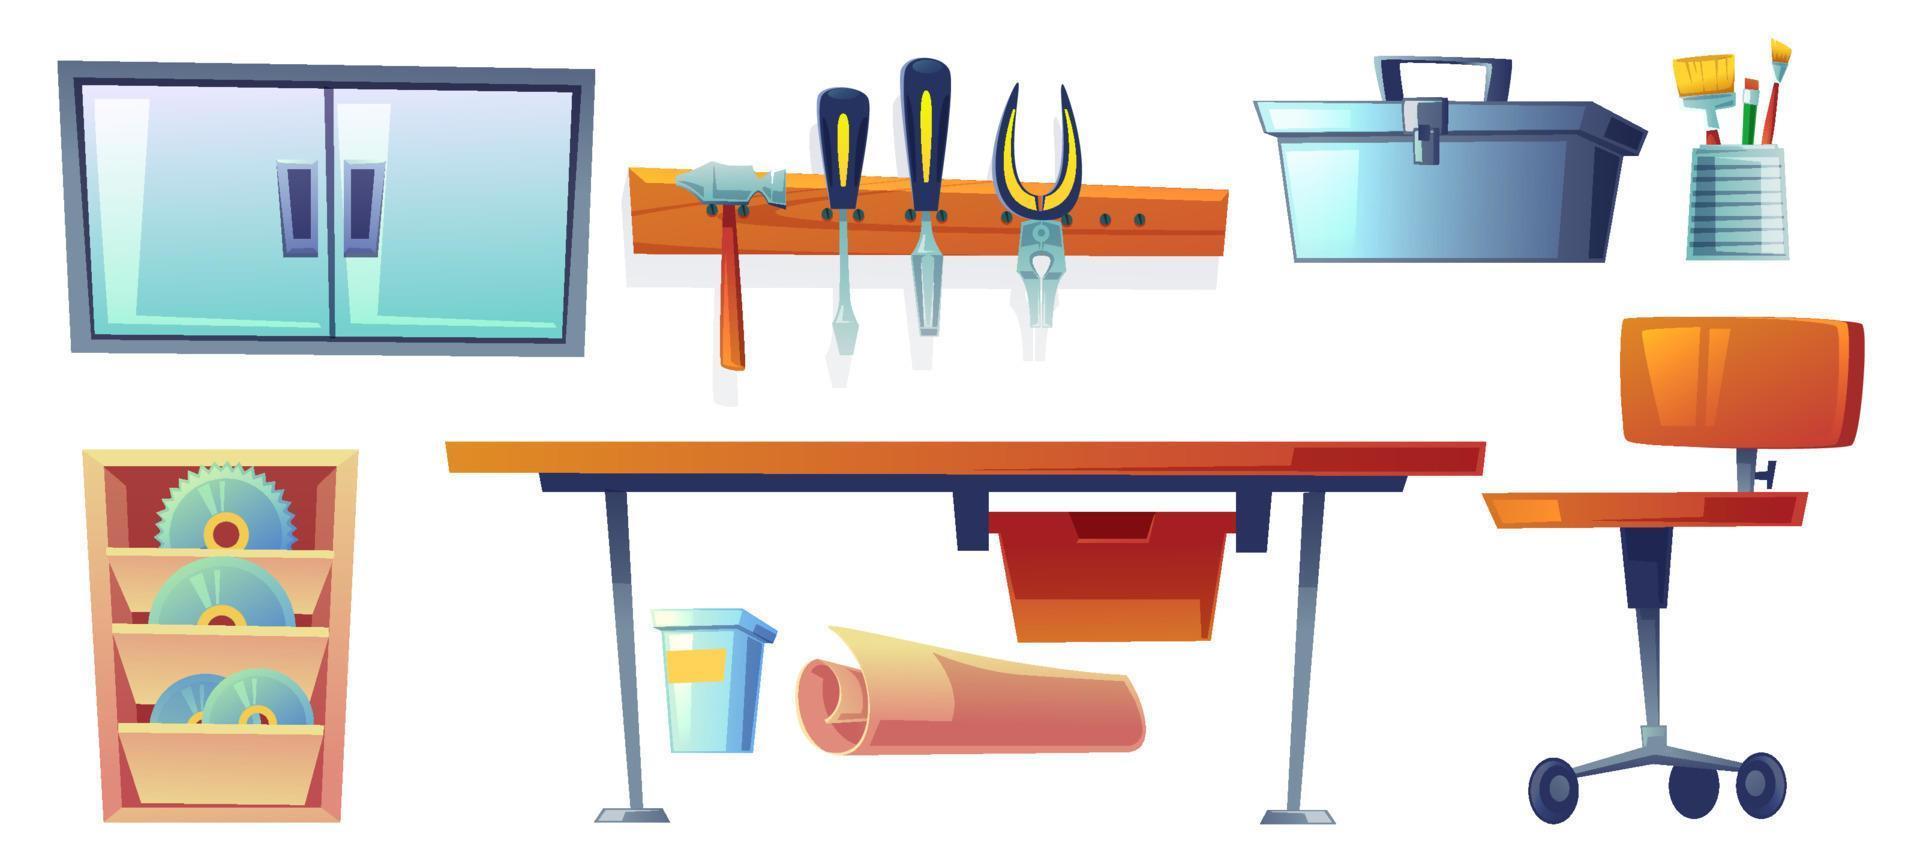 Garage instruments, tools for carpentry works vector